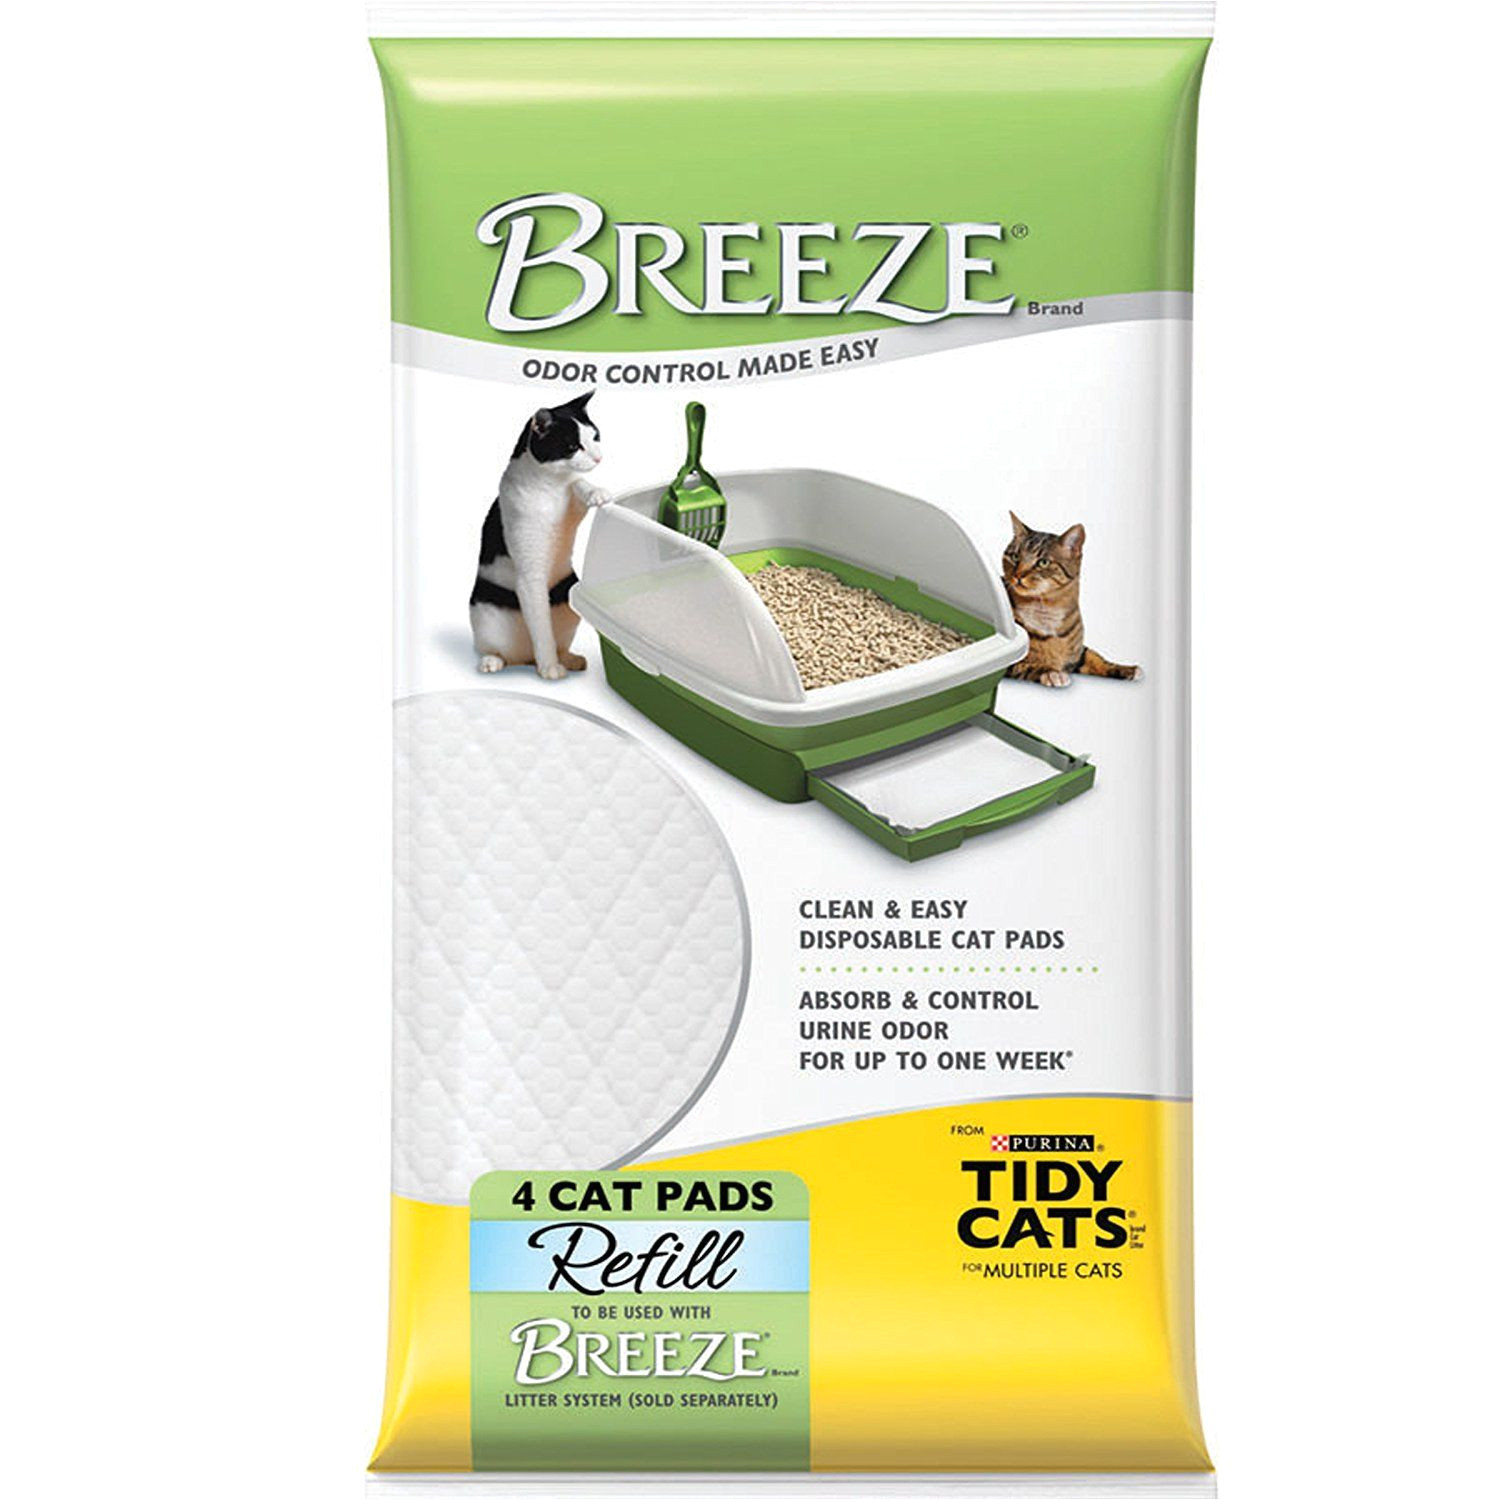 purina tidy cats breeze litter system unscented cat pad refills you can get